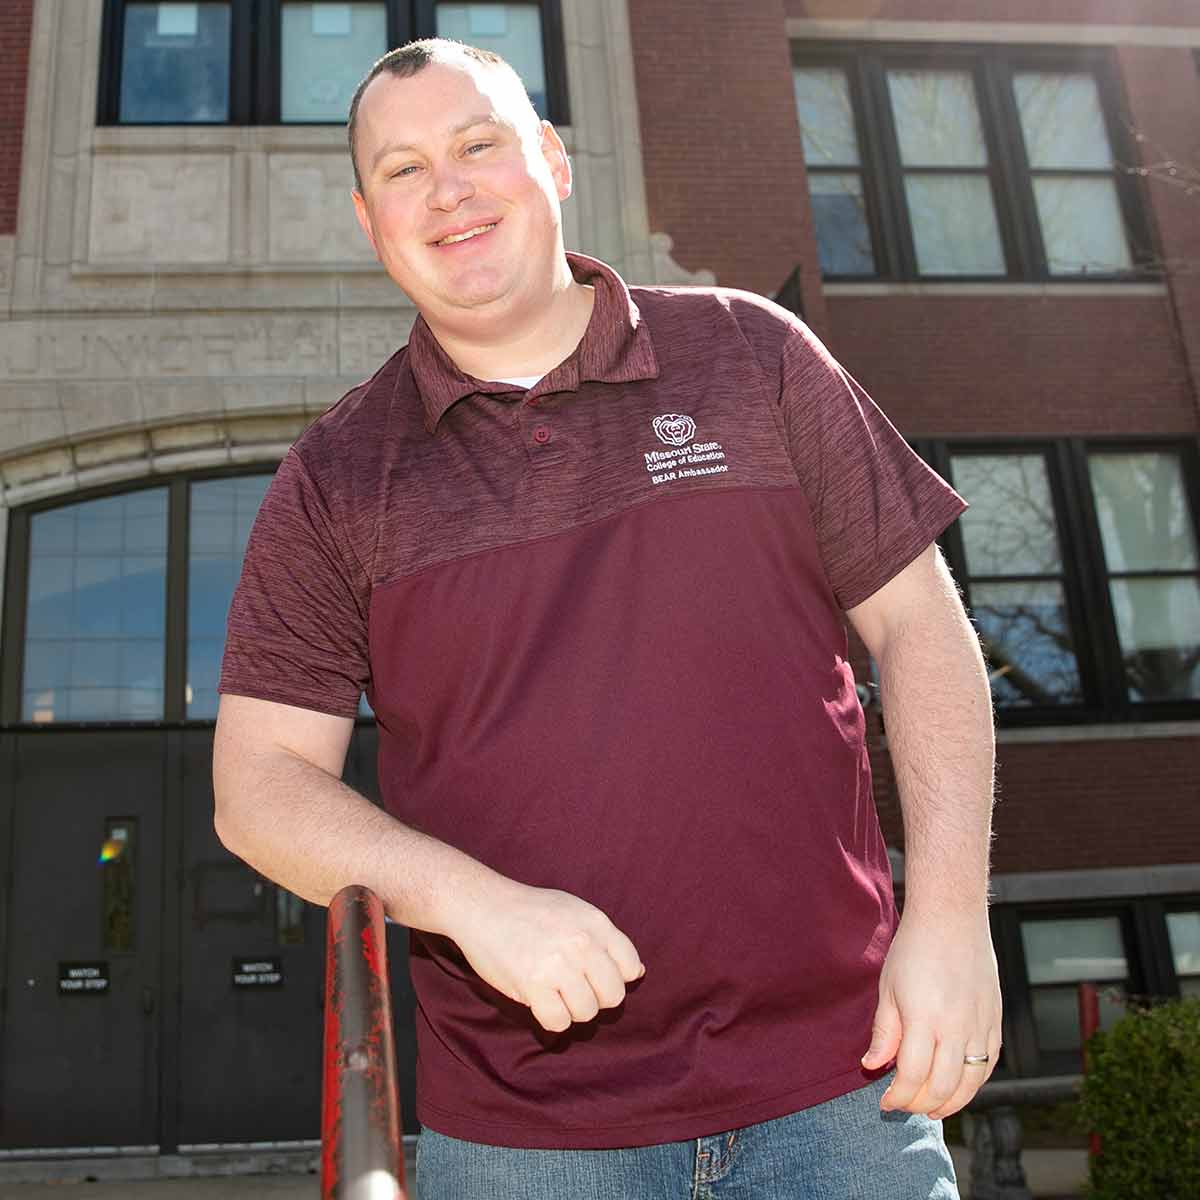 A teacher wearing a maroon Missouri State polo stands outside in front of their school's main entrance.